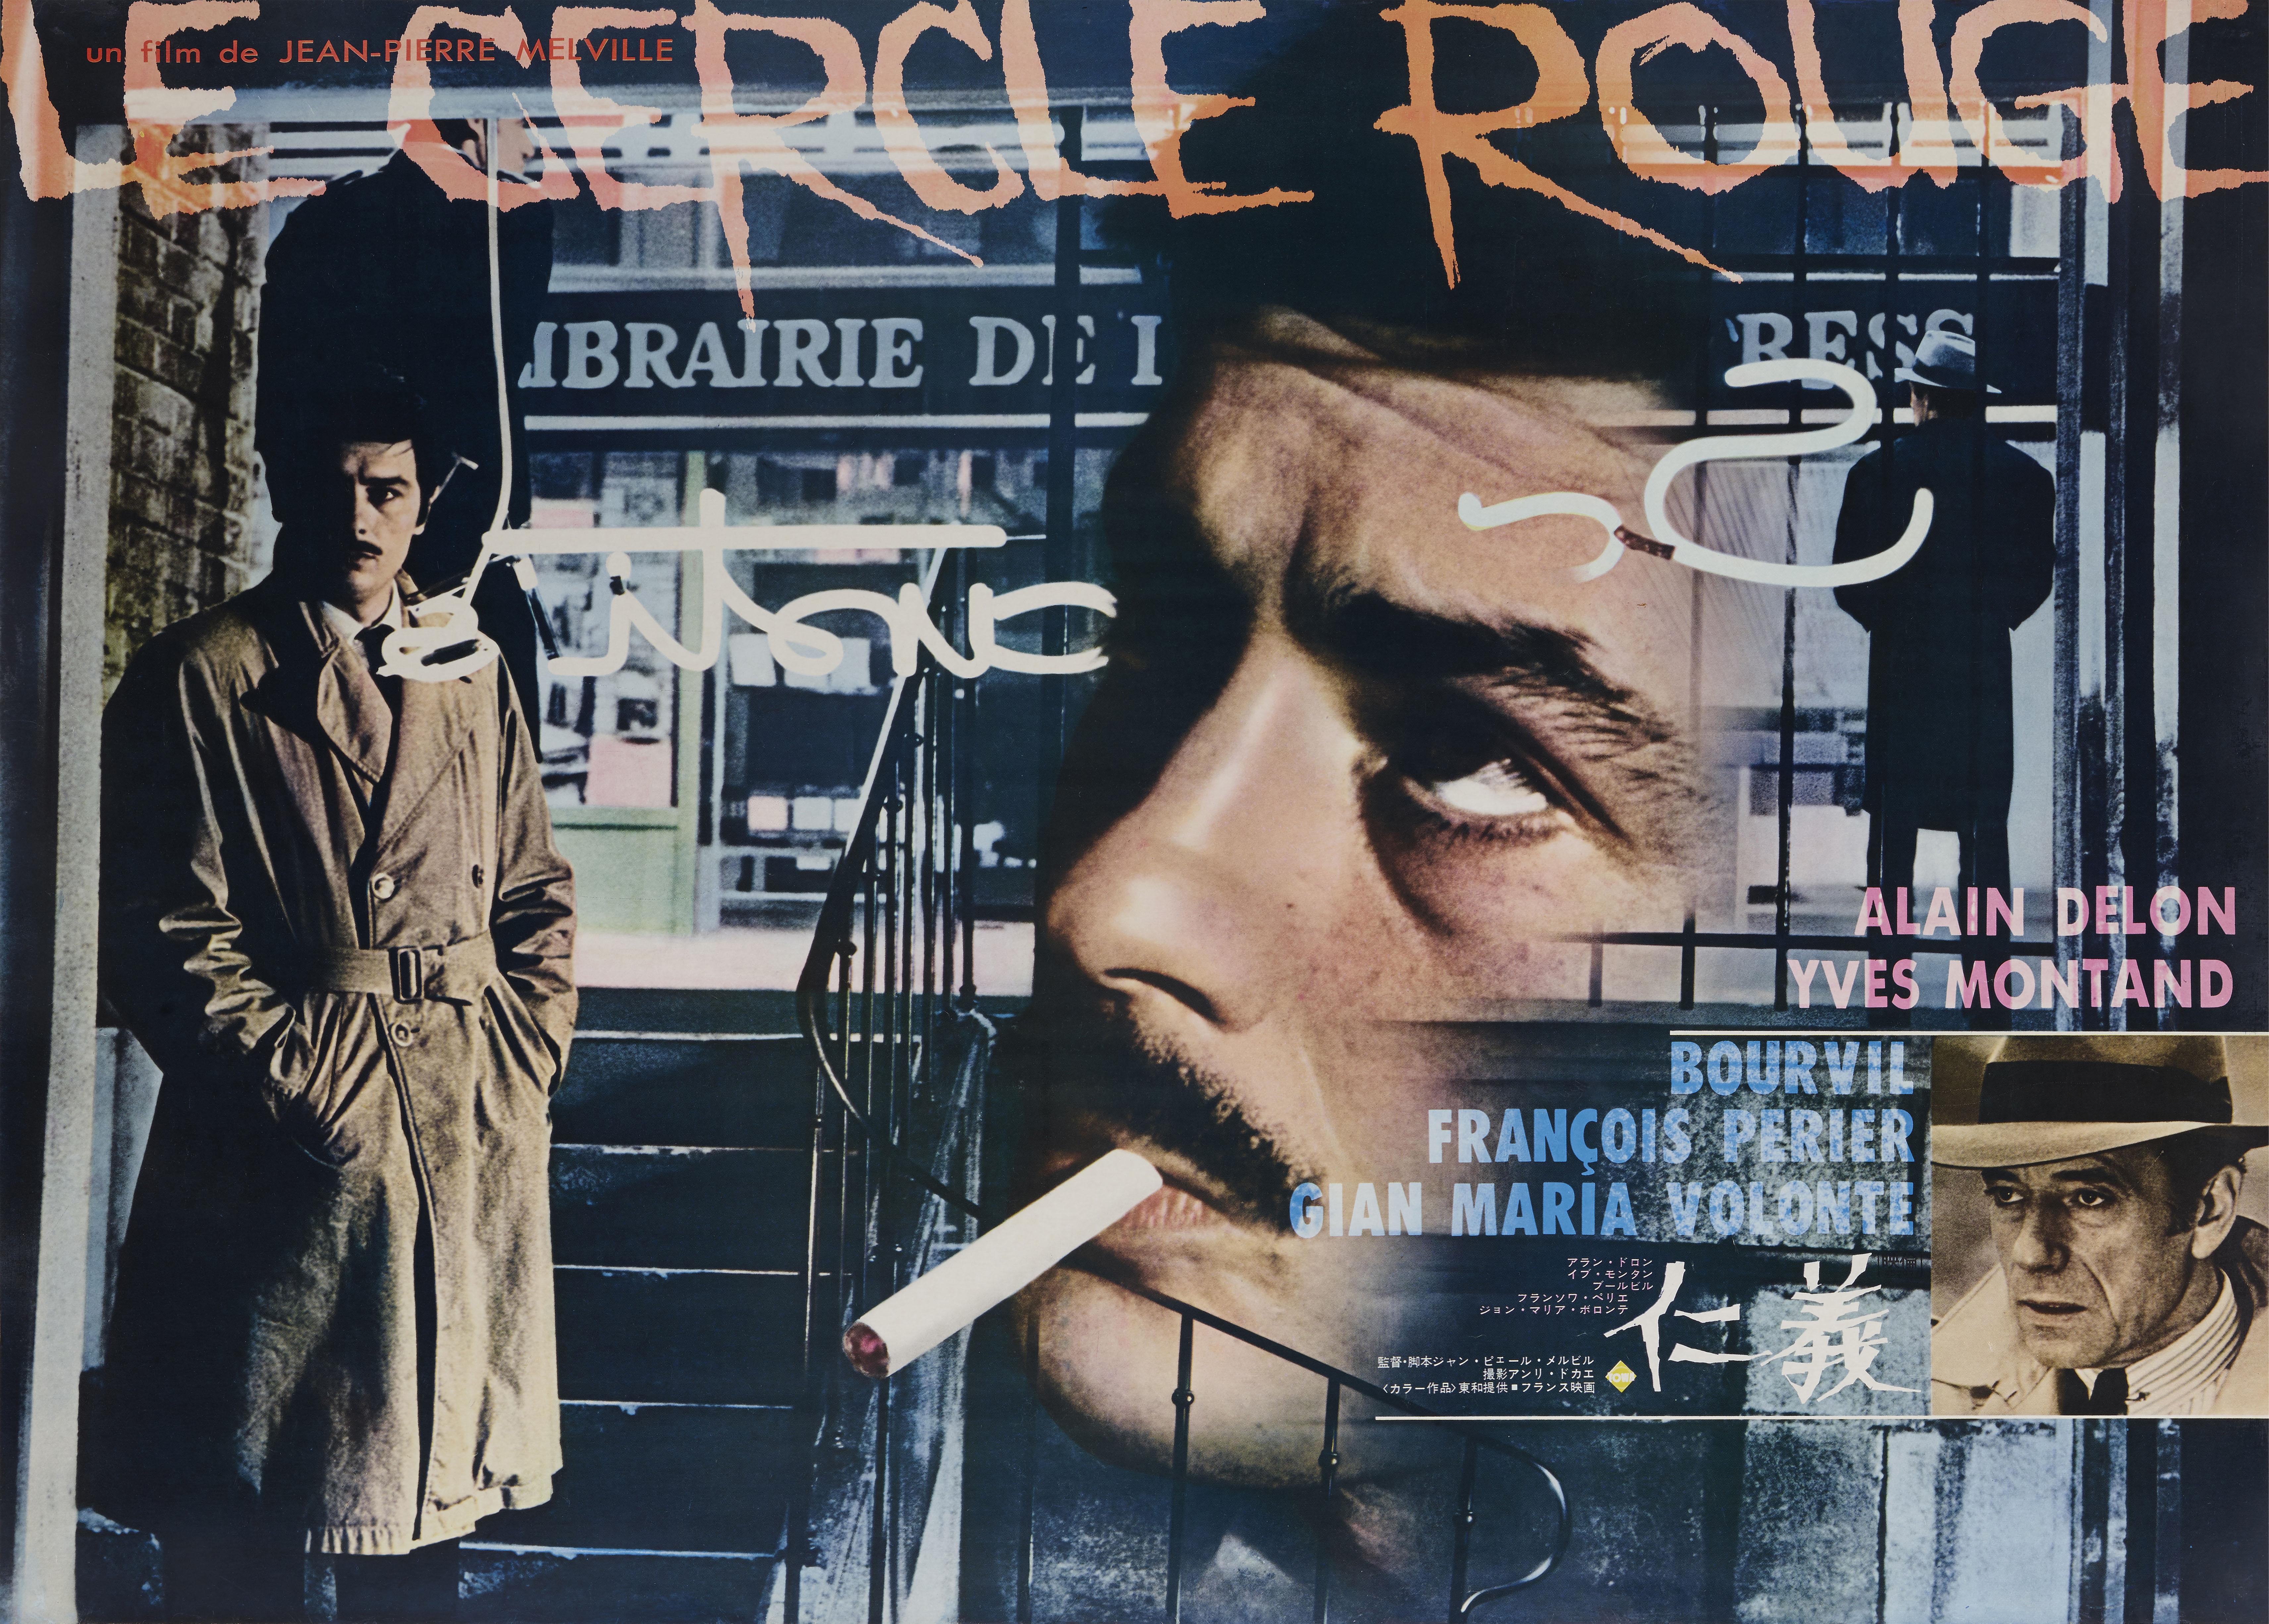 Original Japanese poster for the Le Cercle Rouge, 1970.
This film was written and directed by Jean-Pierre Melville and starred Alain Delon, Bourvil and Gian Maria Volontè This is a crime, thriller with a famous a climactic heist sequence which is